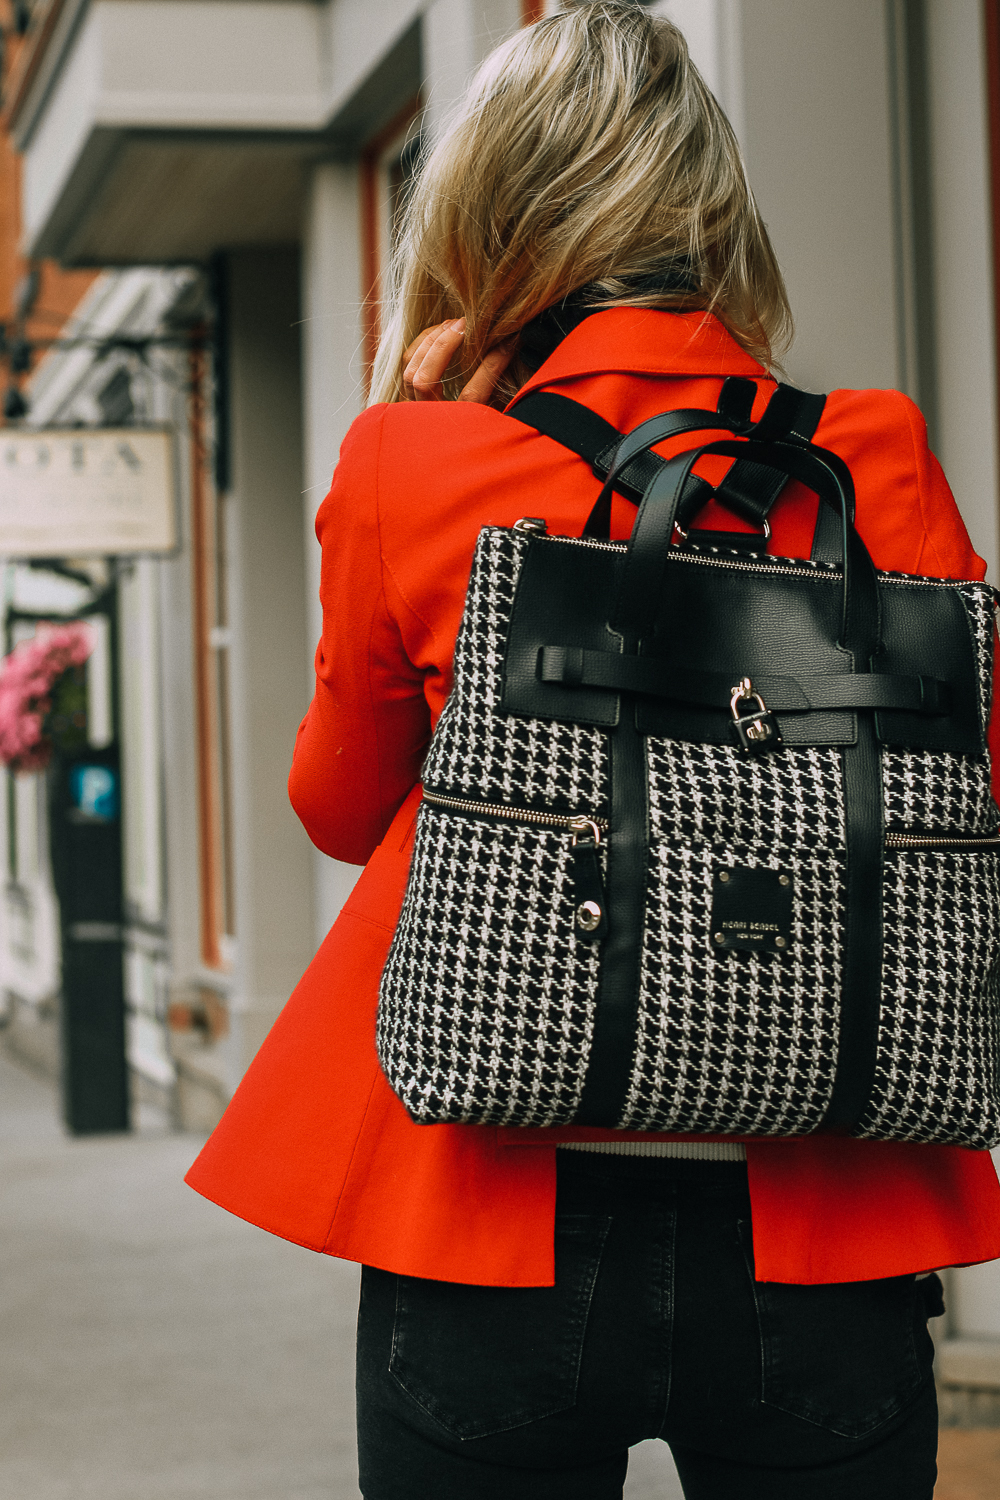 Fall Statement Handbags 2018, this black houndstooth Henri Bendel Jetsetter convertible bag is SO chic, Paired with a red Smythe dutchess blazer, black cropped Mavi jeans and Stuart Weitzman booties